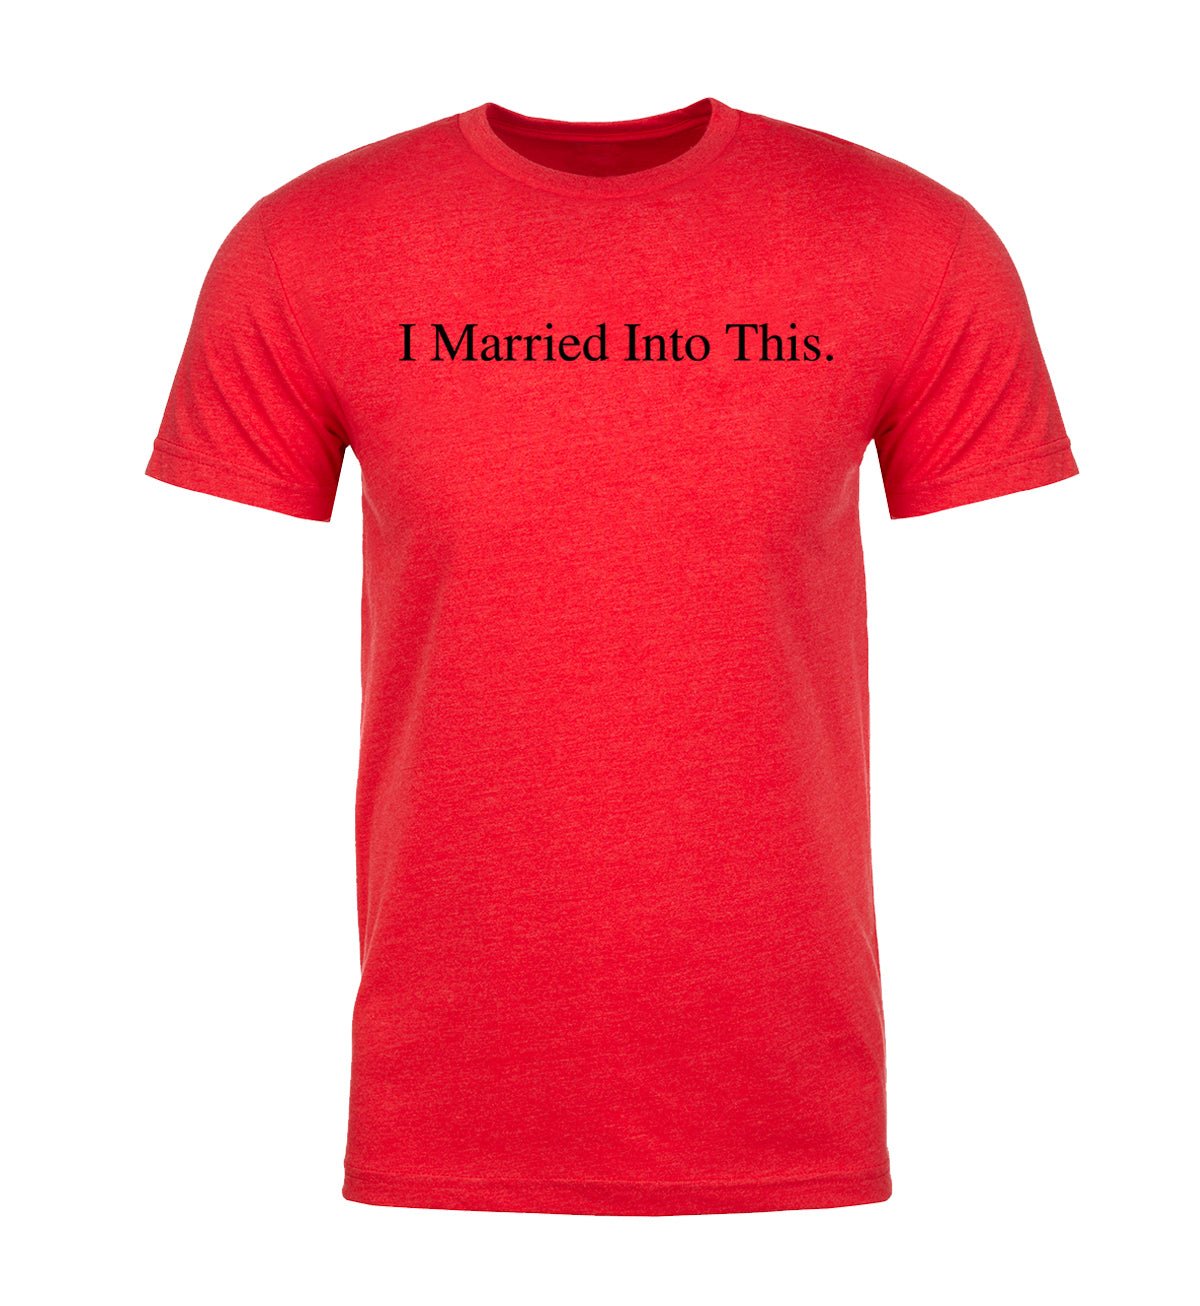 I Married Into This. Unisex T Shirts - Mato & Hash